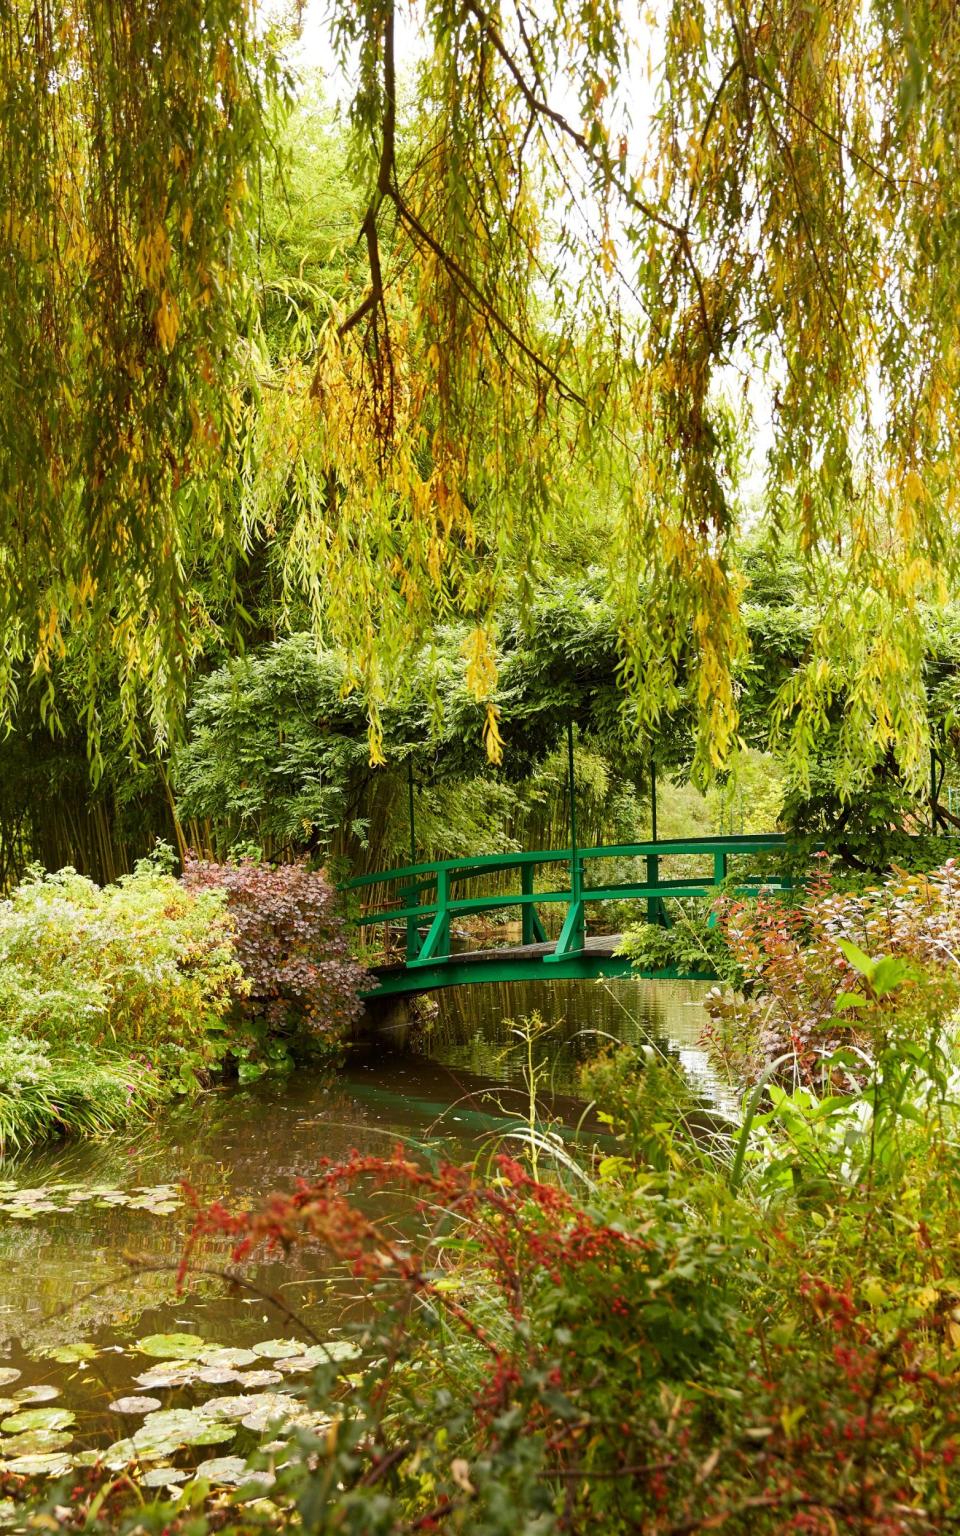 Monet spent some 35 years planting, replanting and felling trees in his garden in Giverny